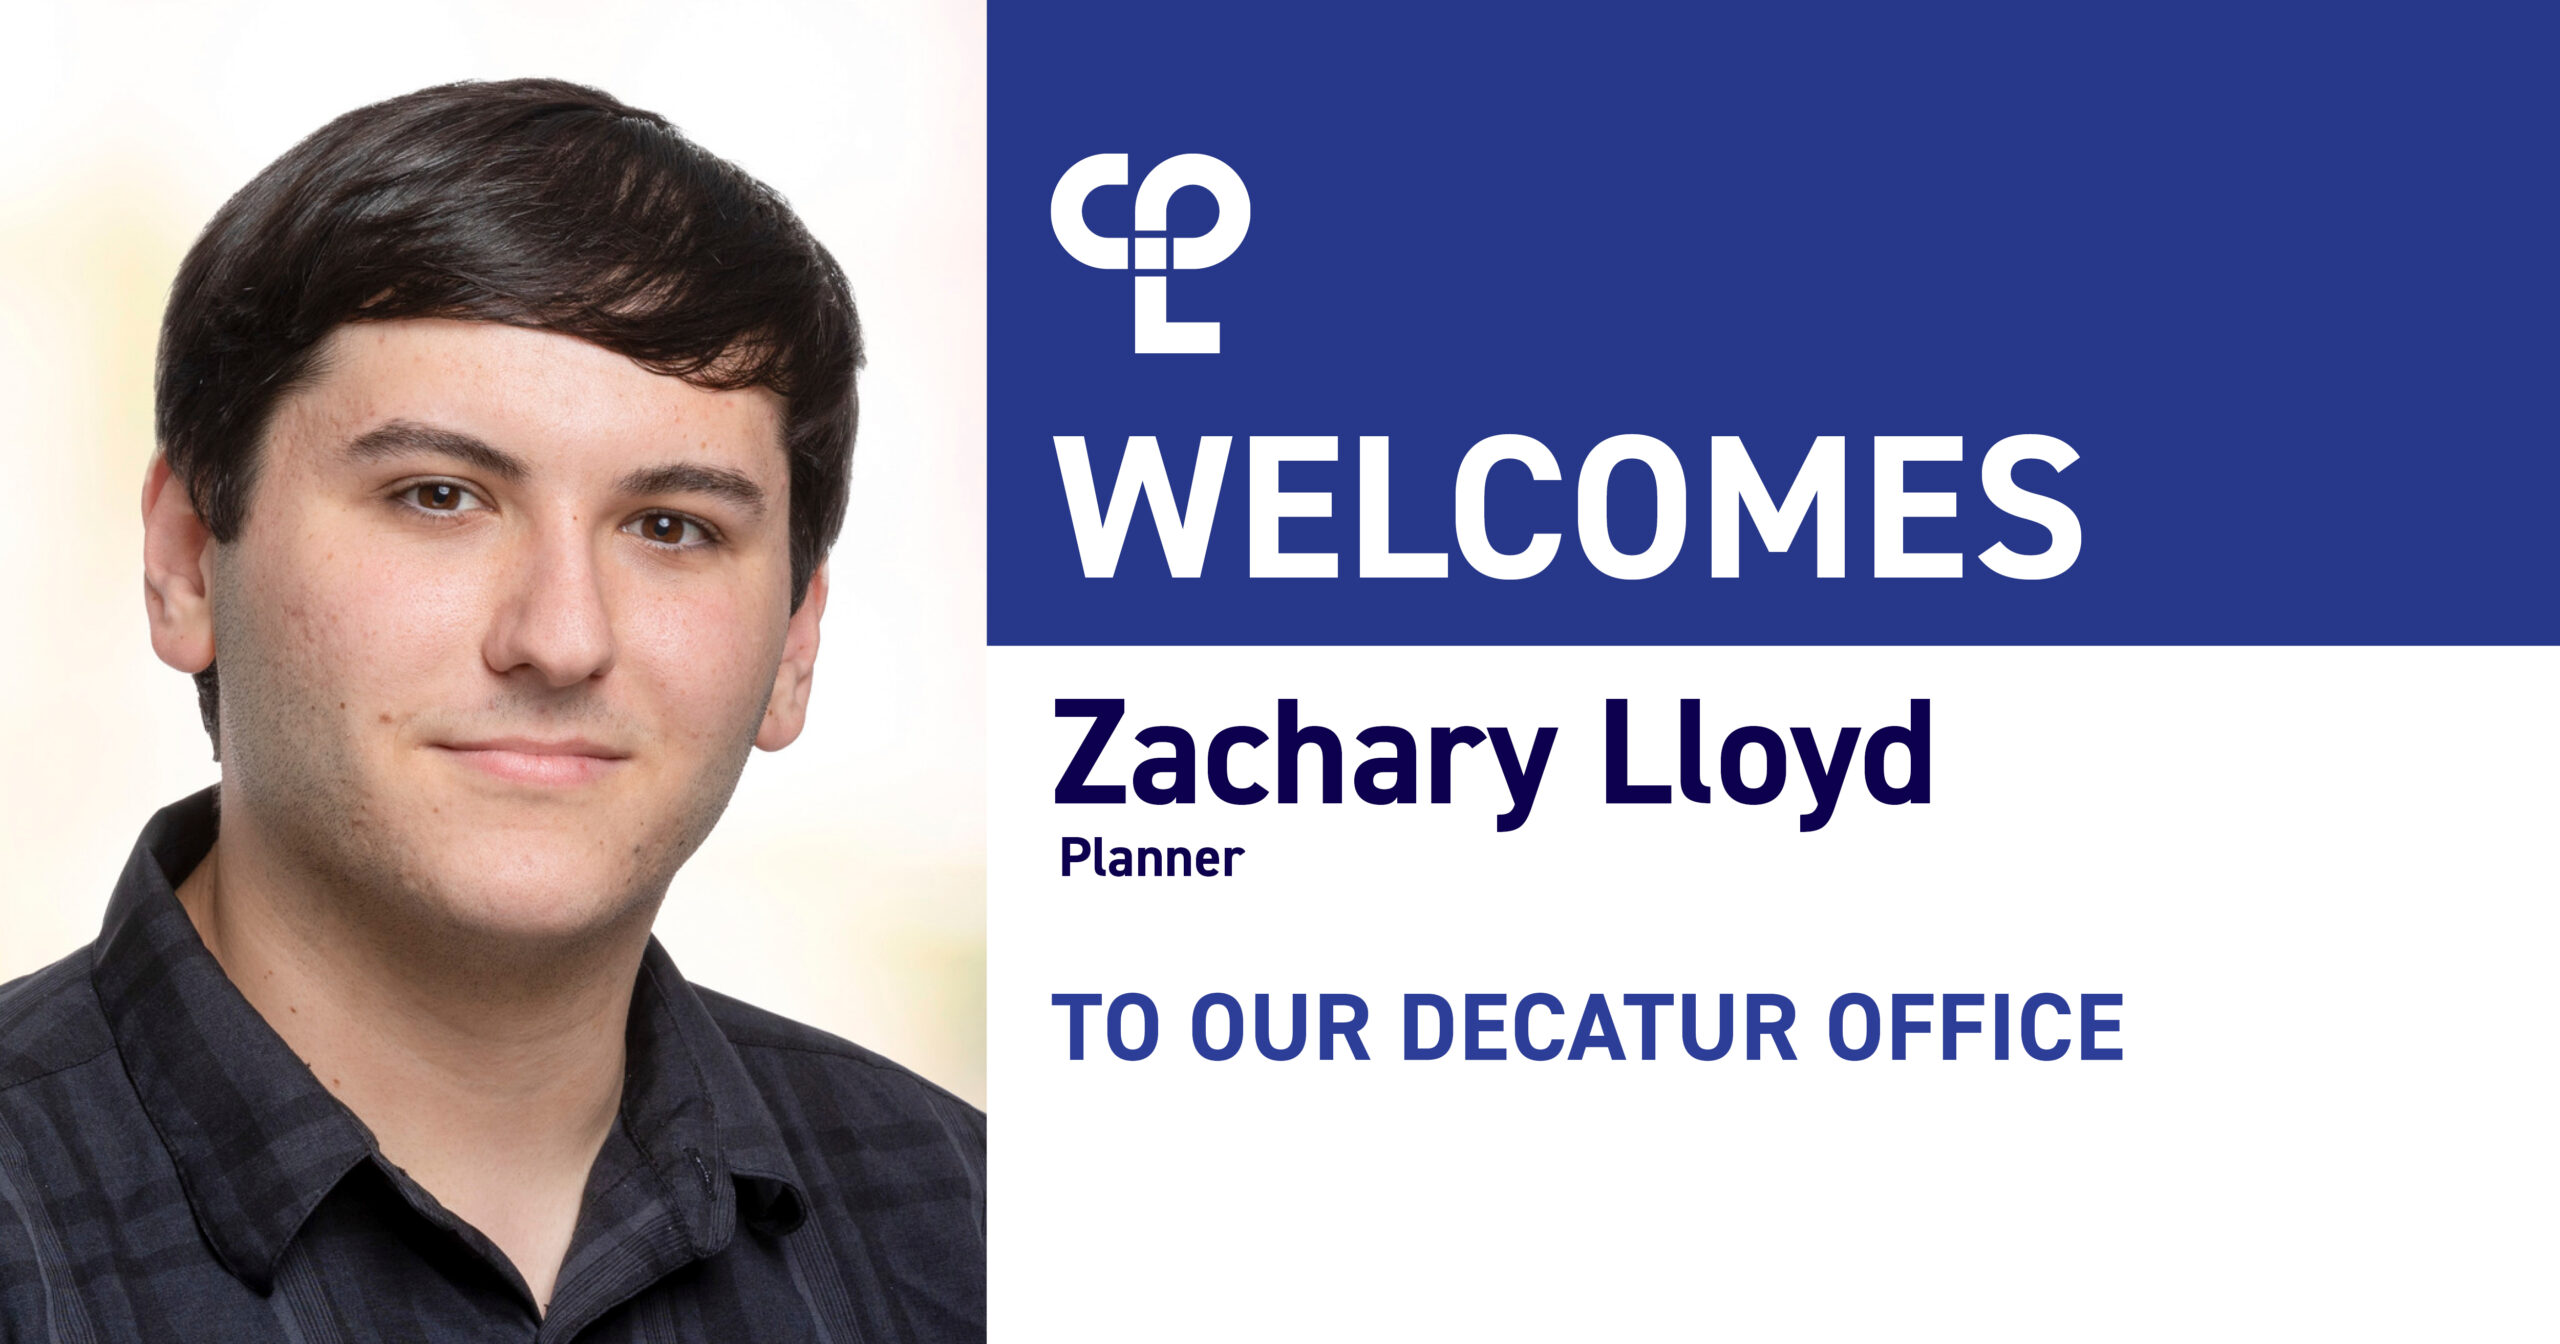 Photo of man in black polo shirt next to text that reads "CPL Welcomes Zachary Lloyd, Planner, to our Decatur office. 